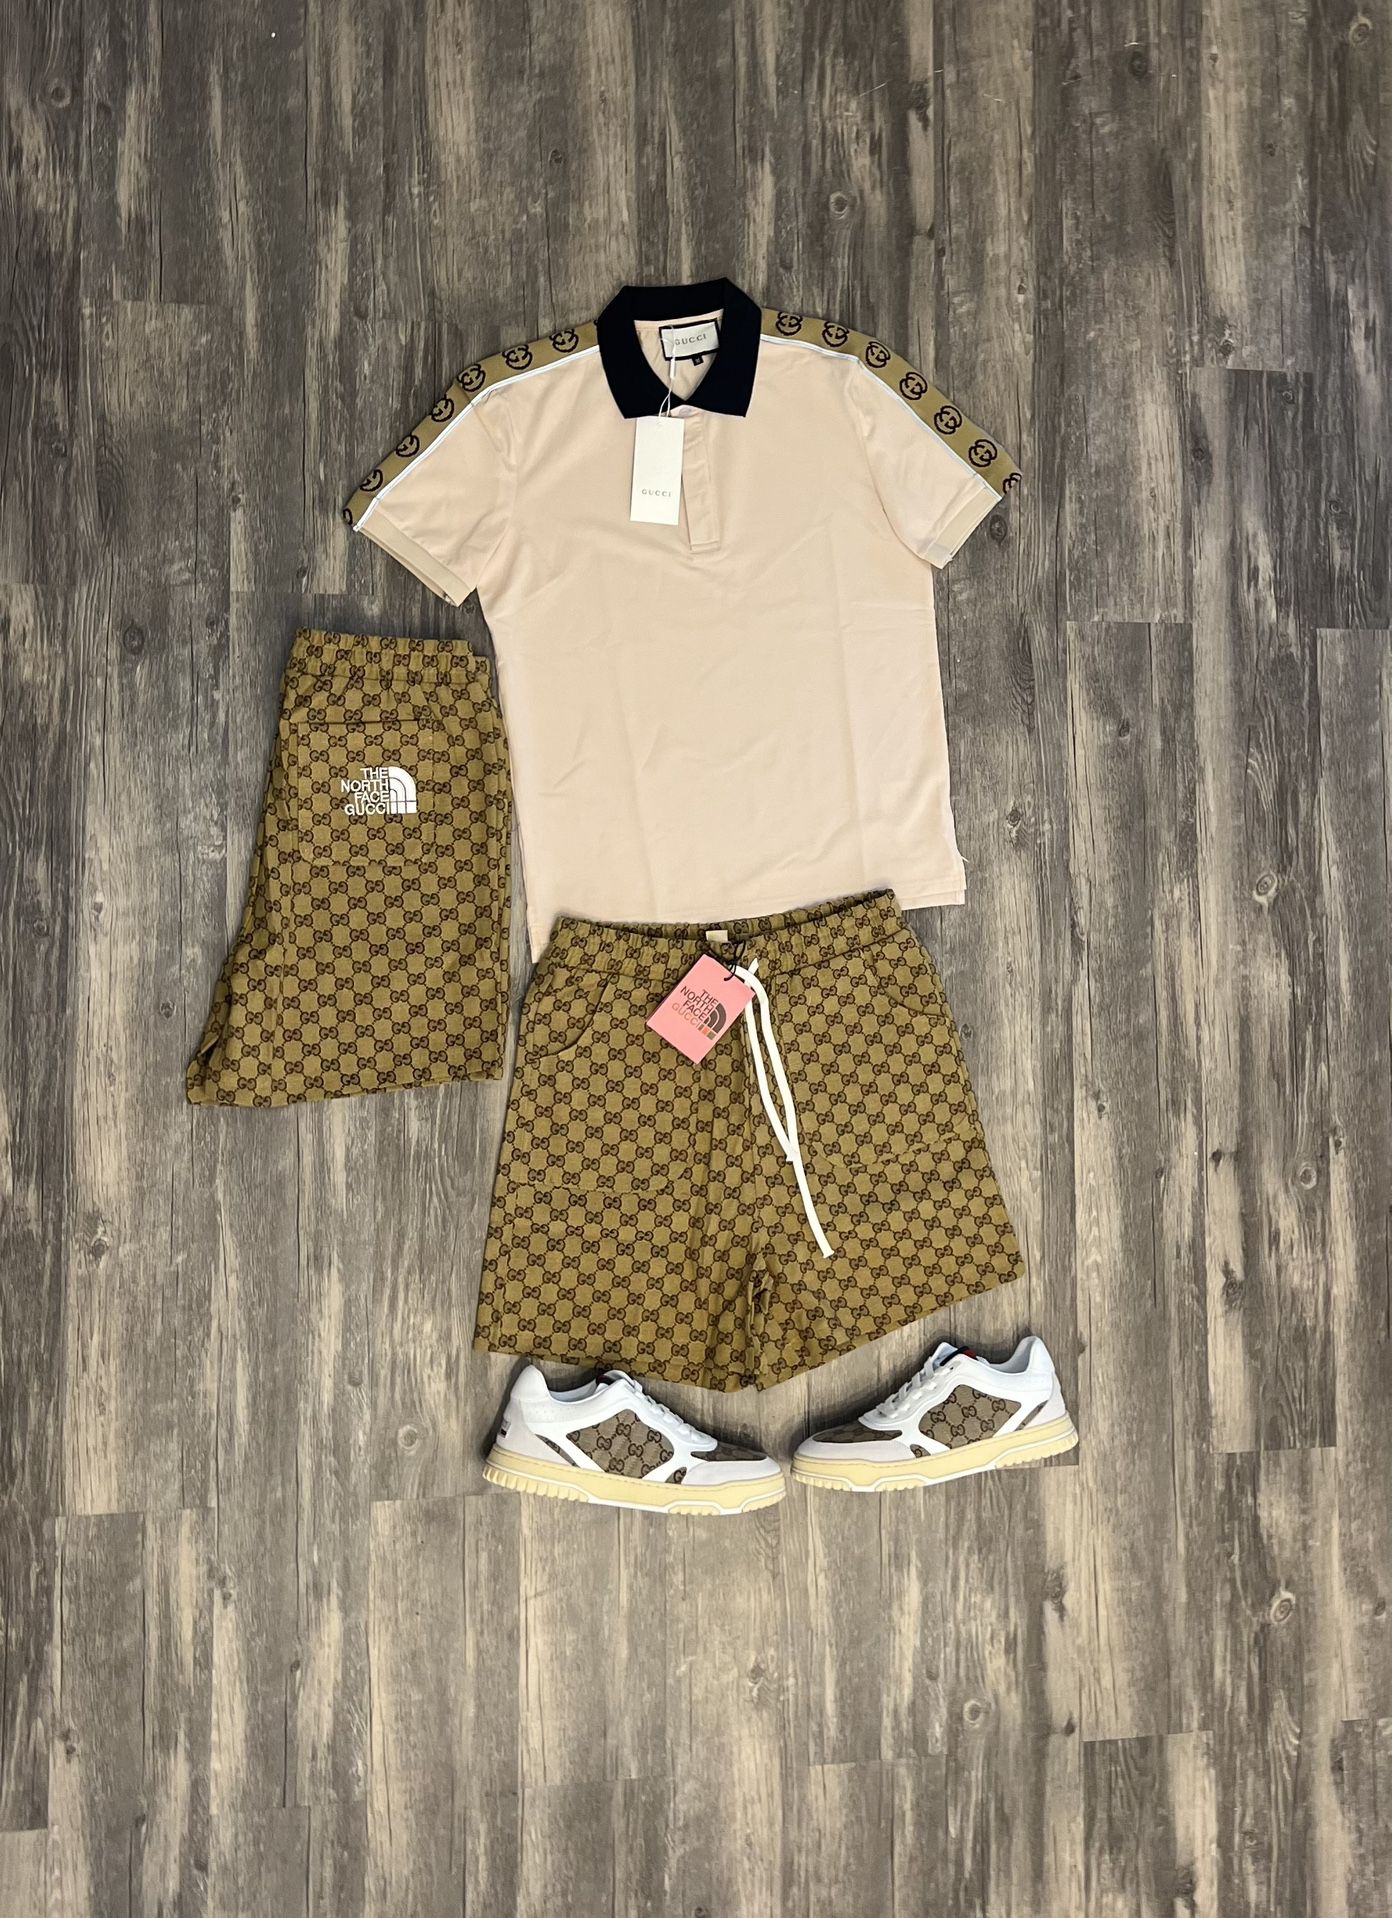 Gucci Shirt +Gucci Shorts+ Gucci Shoes Brand New With Box And Dust Bag 